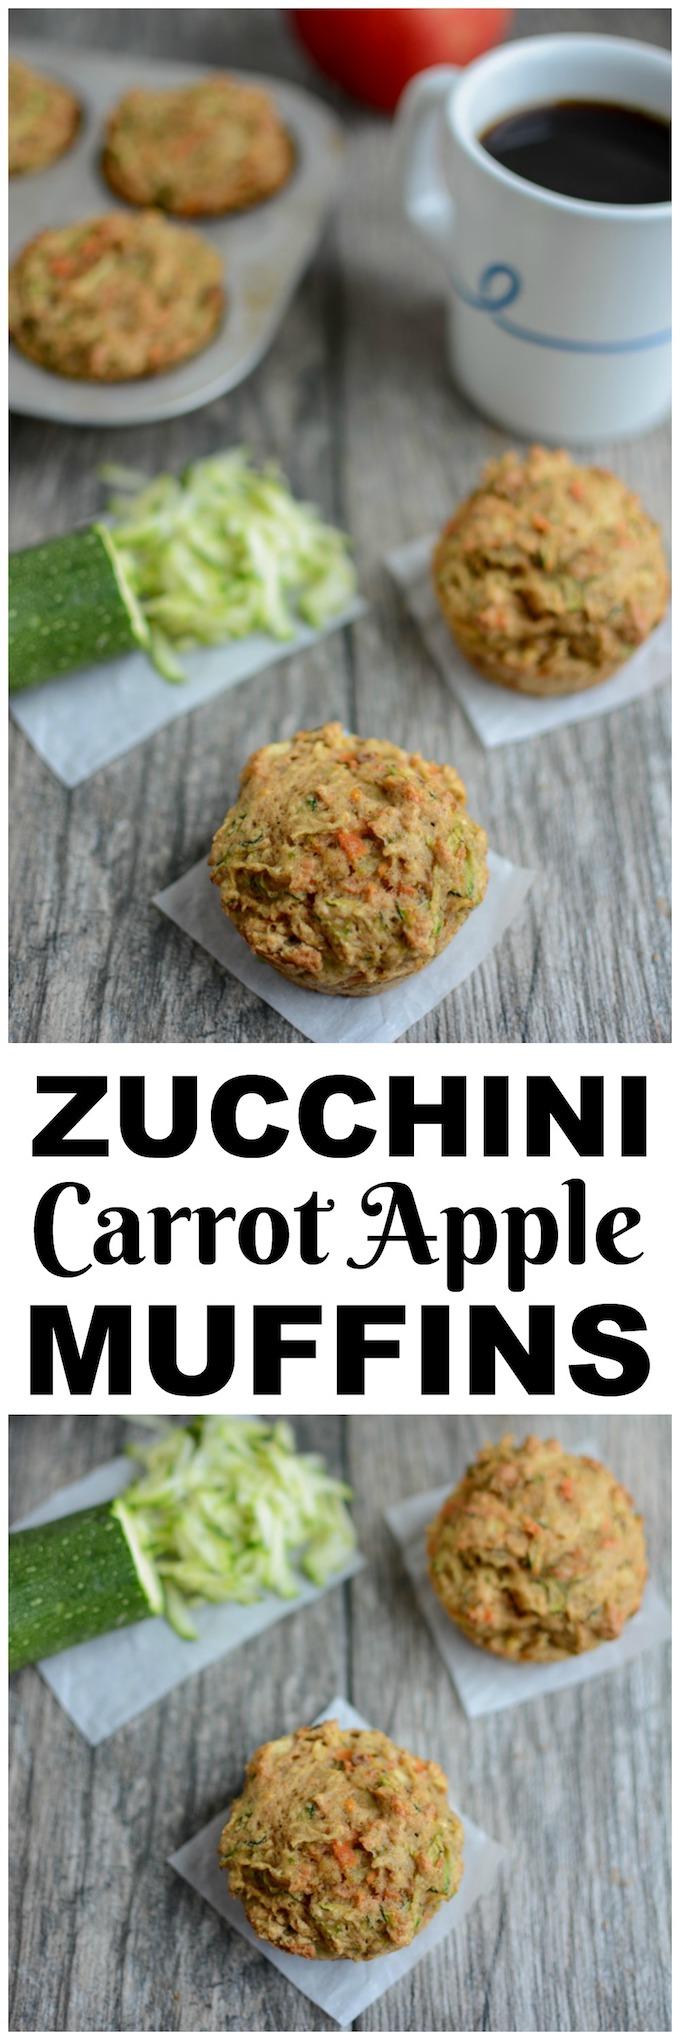 These healthy Zucchini Carrot Apple Muffins are packed with fruits and vegetables and make the perfect kid-friendly breakfast or snack!